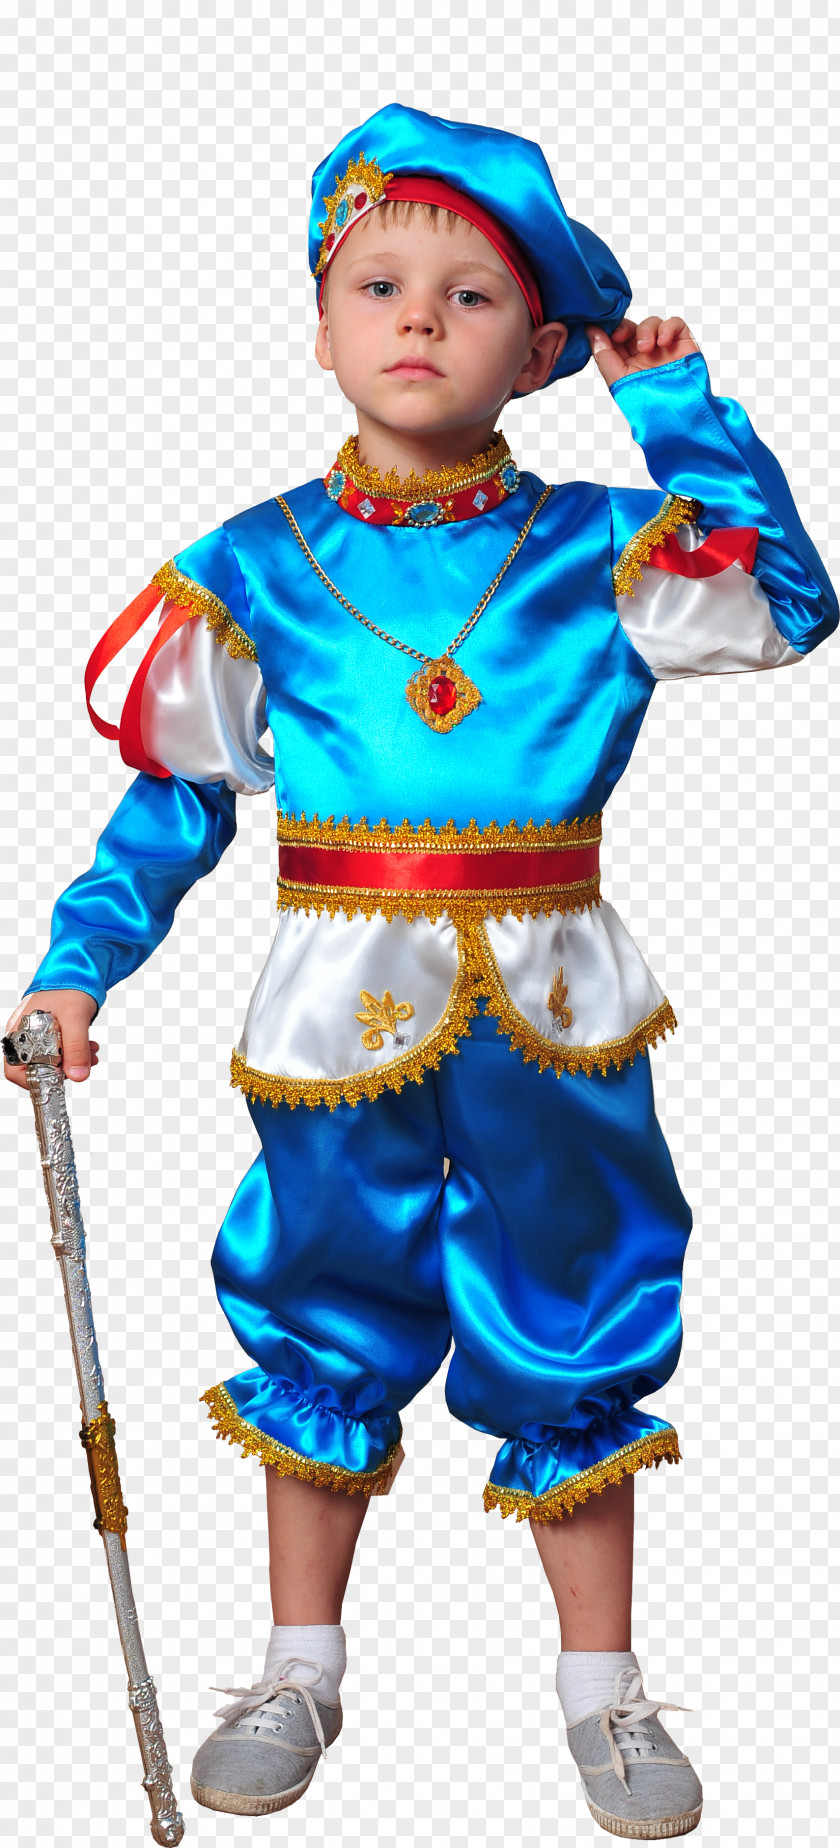 The Little Prince Boy Kiev Clothing Costume PNG